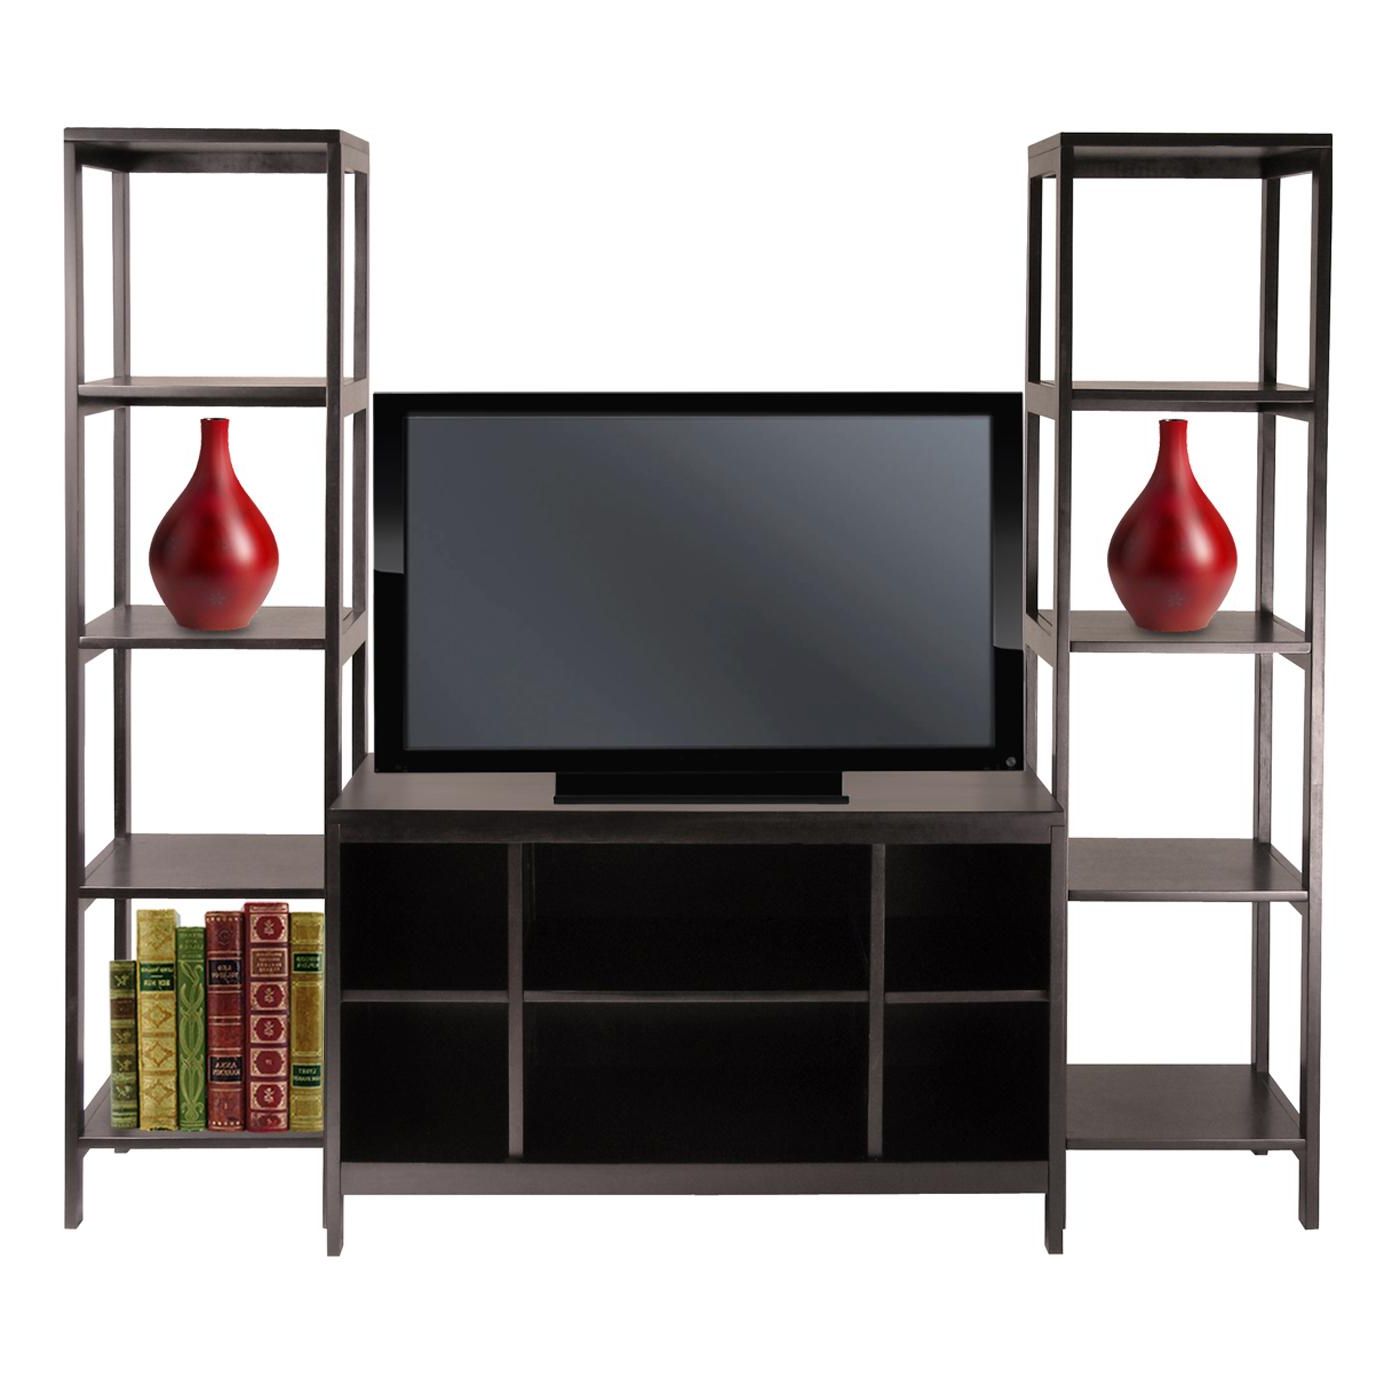 Bookshelf And Tv Stands With 2017 Diy Bookshelf Tv Stand — Home Decorcoppercreekgroup : Bookshelf (View 20 of 20)